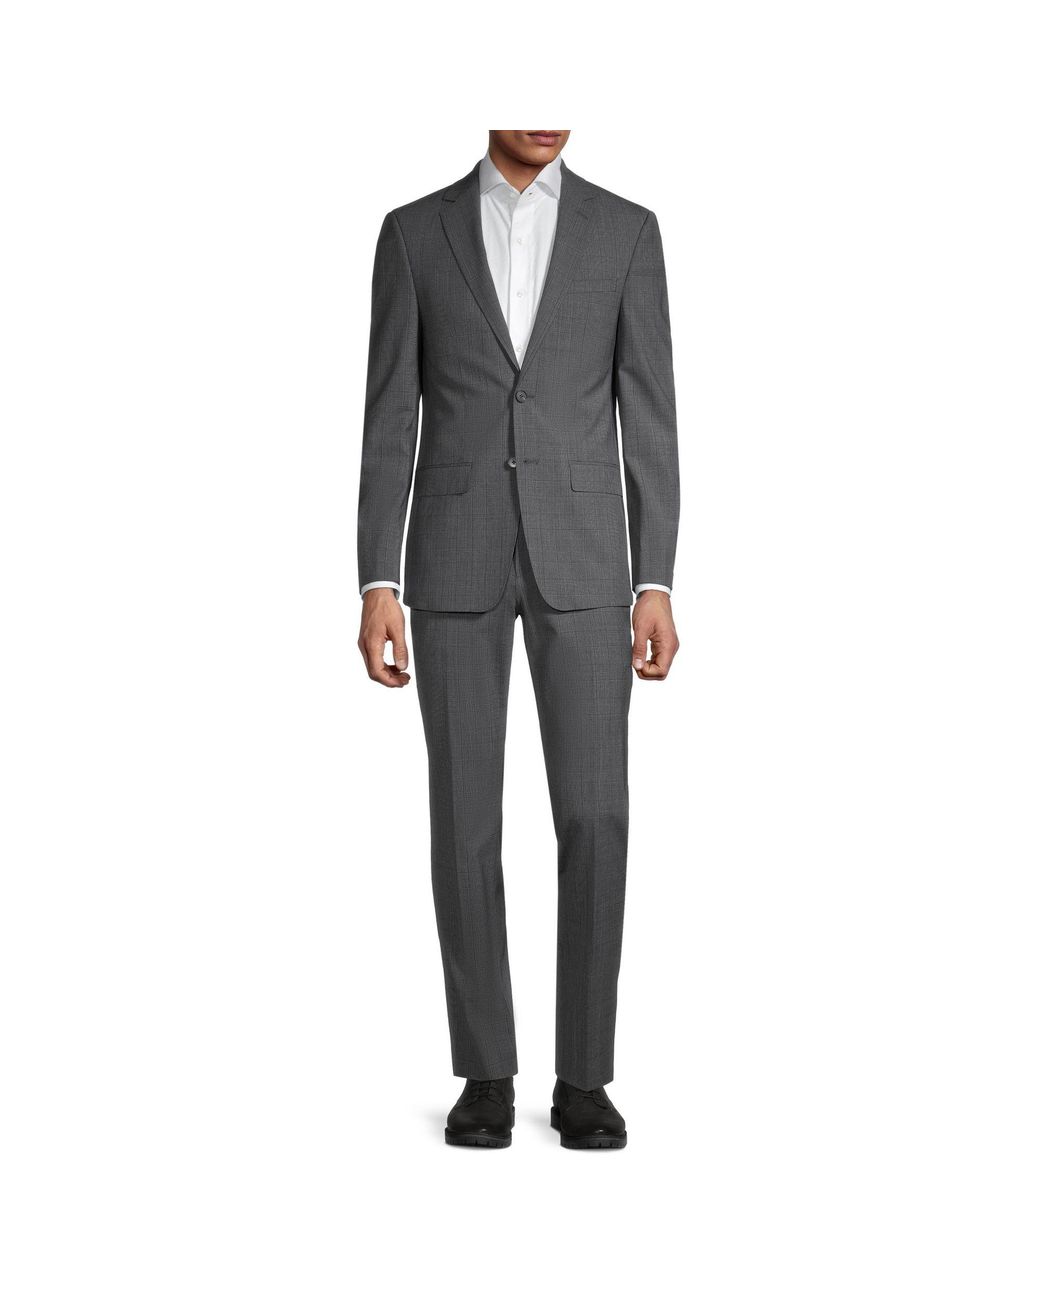 Calvin Klein Wool Extra Slim-fit Plaid Suit in Grey (Gray) for Men - Lyst